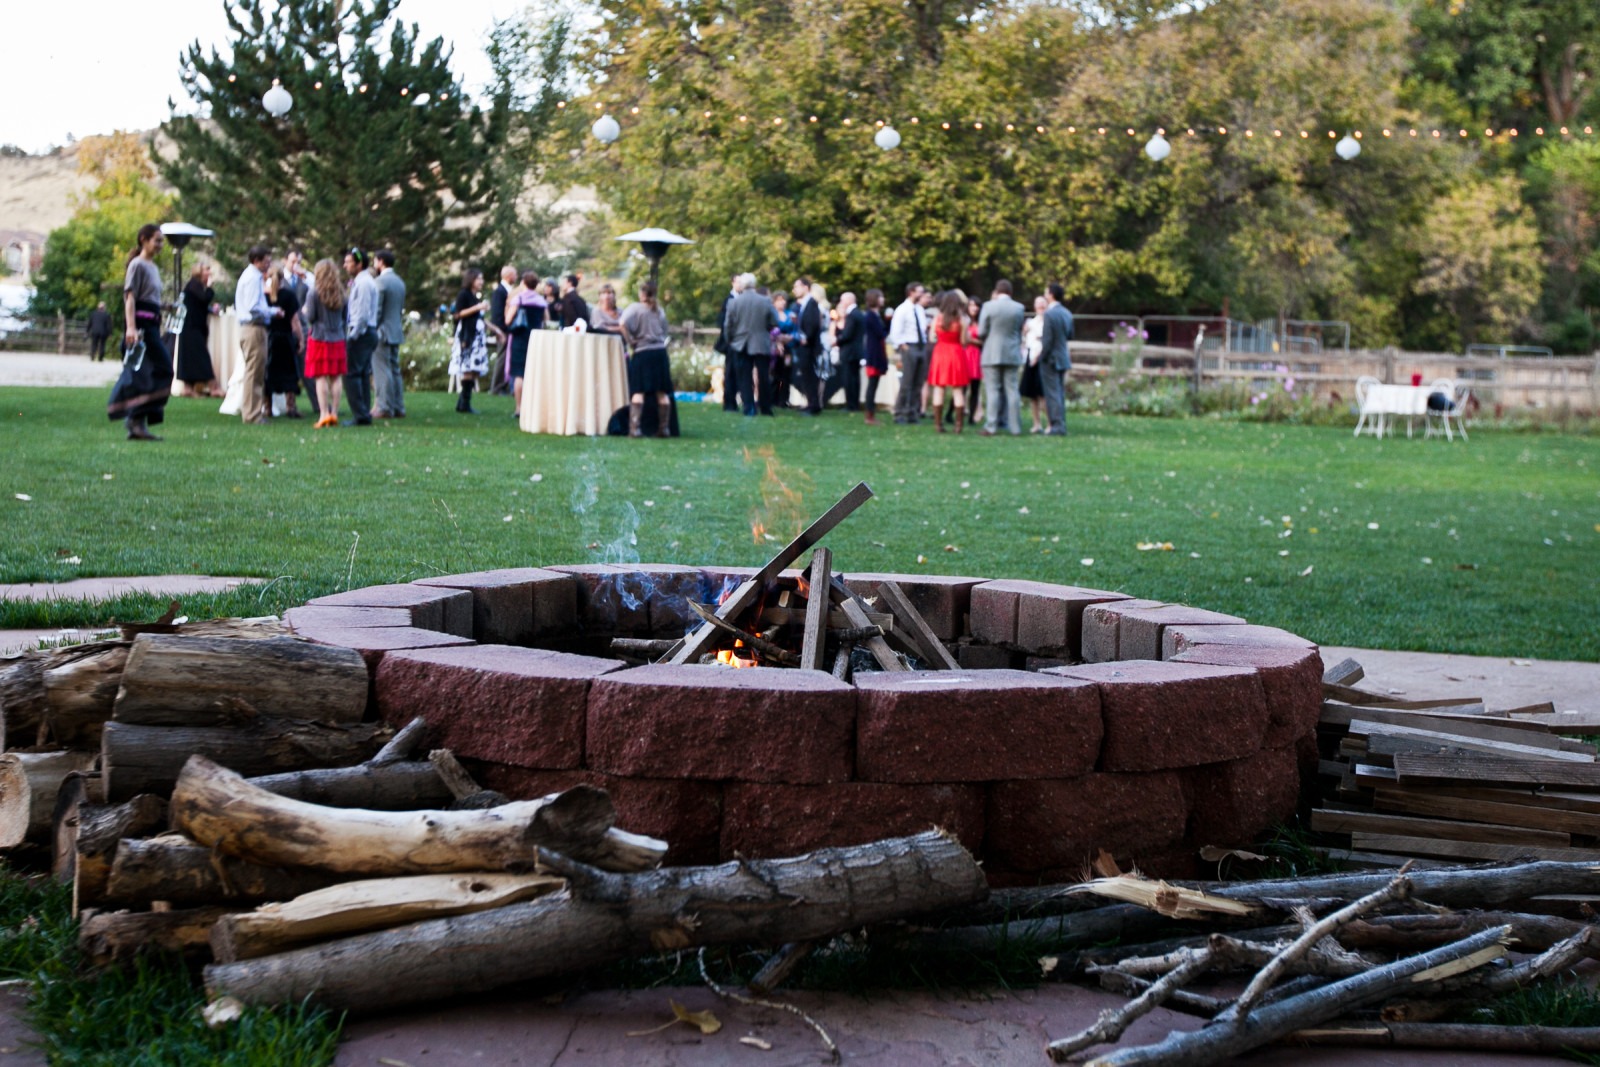 a fire burns in a brick fire pit while wedding guests mingle